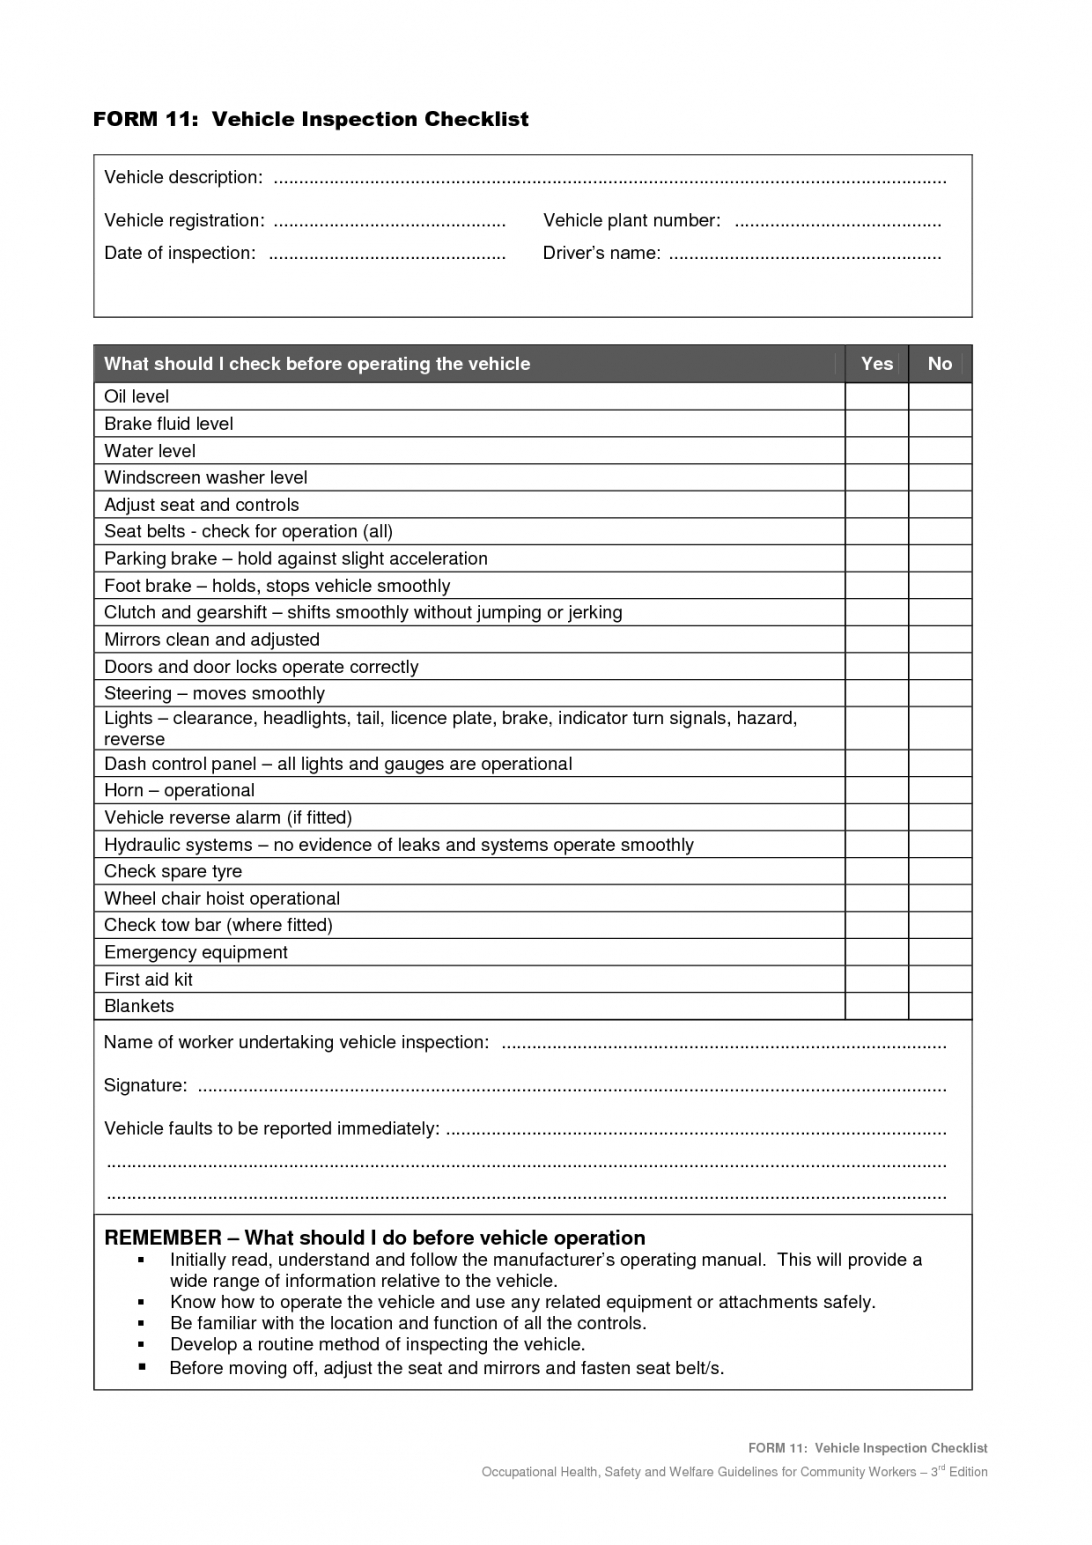 Vehicle Safety Inspection Checklist Form Maintenance Report With Monthly Health And Safety Report Template